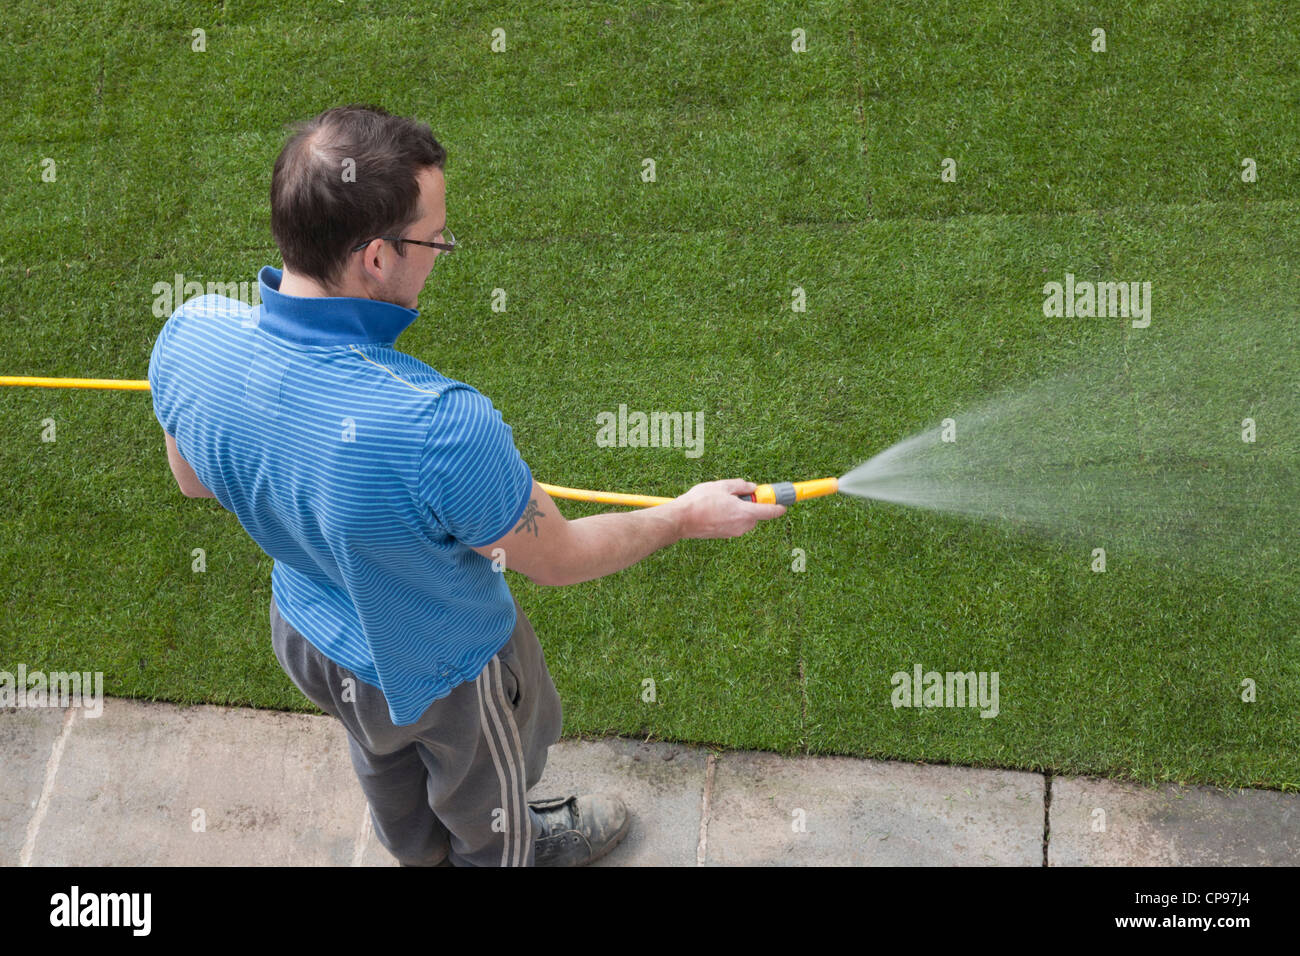 Man watering newly laid turf with hosepipe. Stock Photo